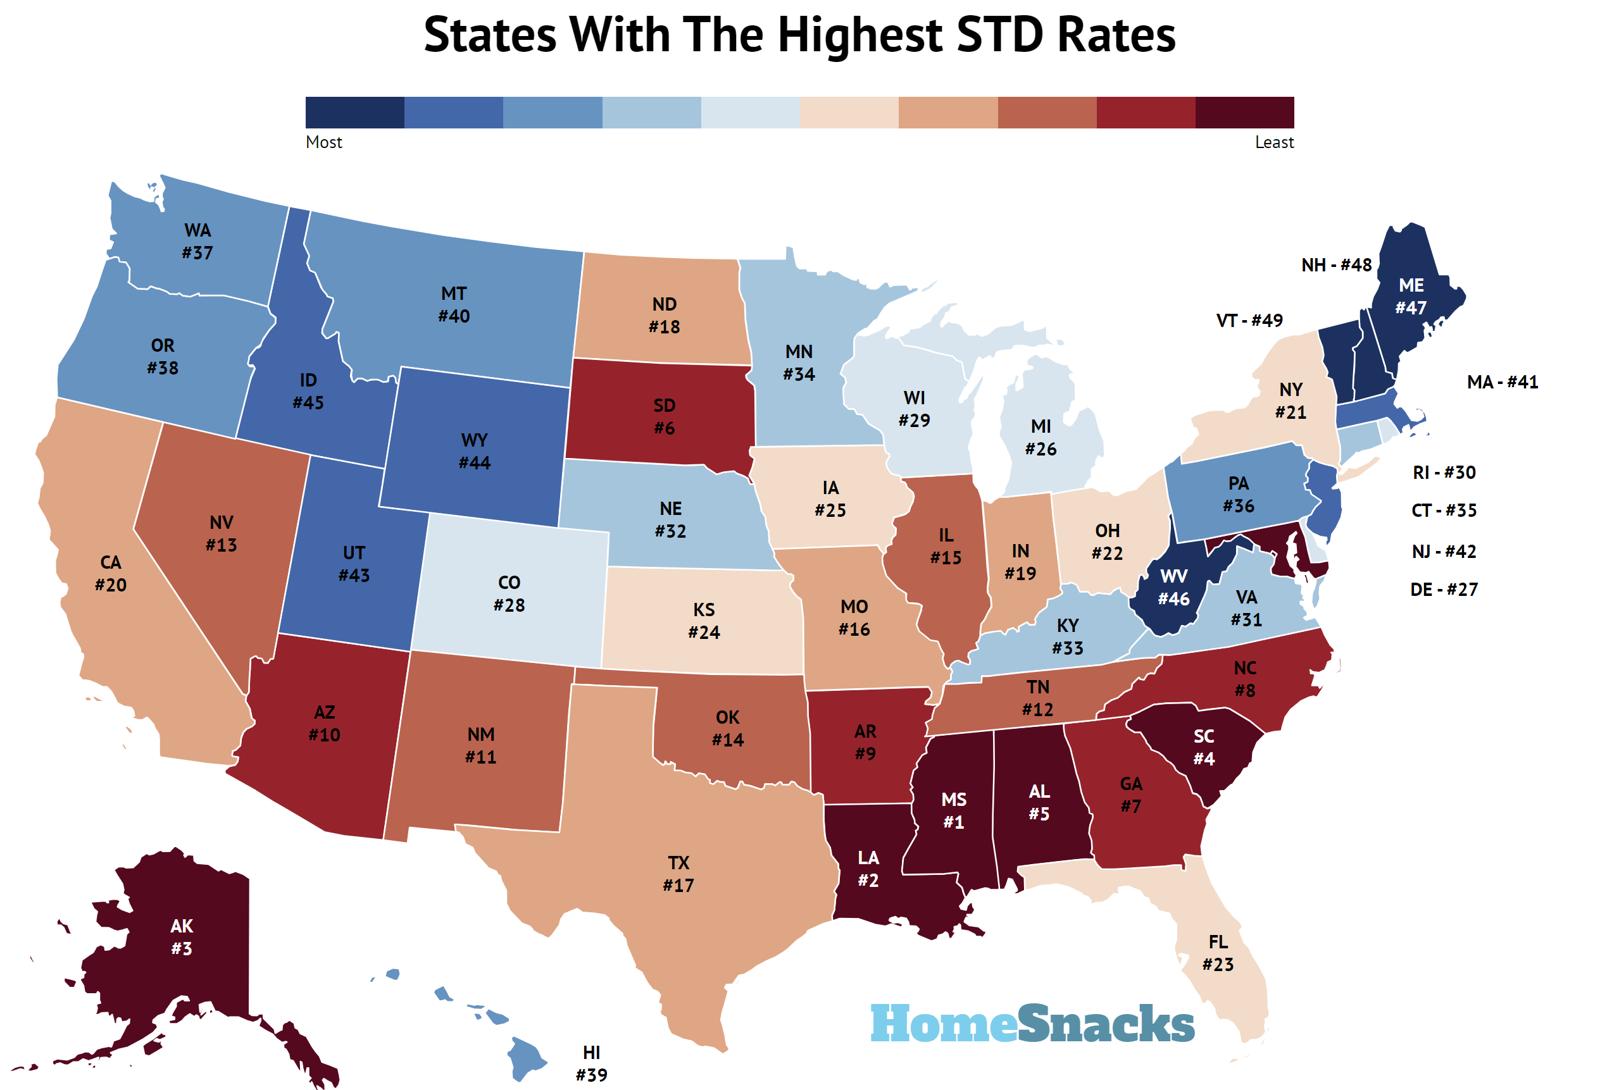 States With The Highest STD Rates